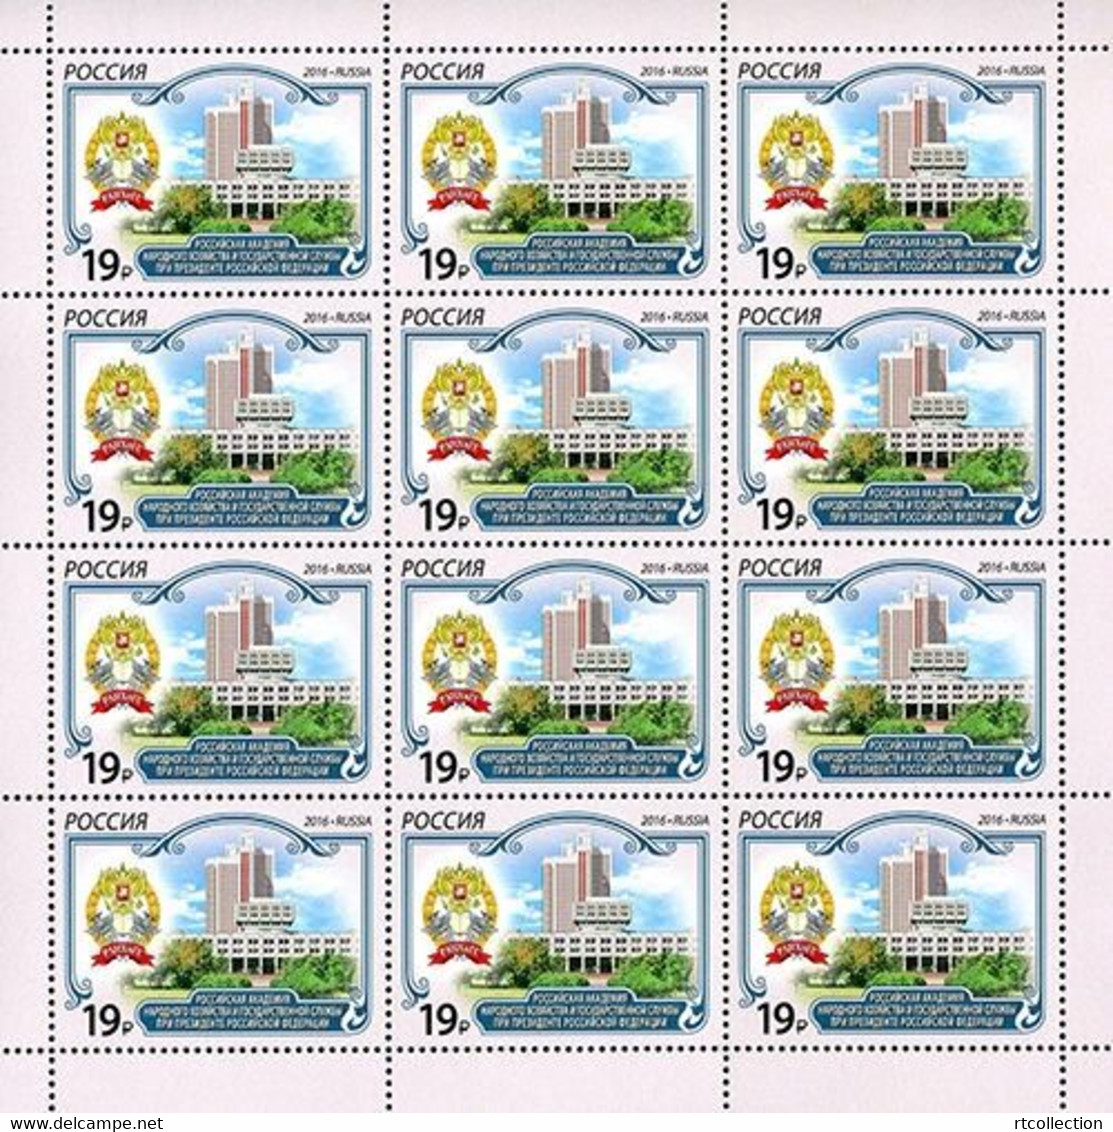 Russia 2016 Sheet Presidential Academy Economy Public Administration Architecture Buidling Geography Places Stamps - Ganze Bögen